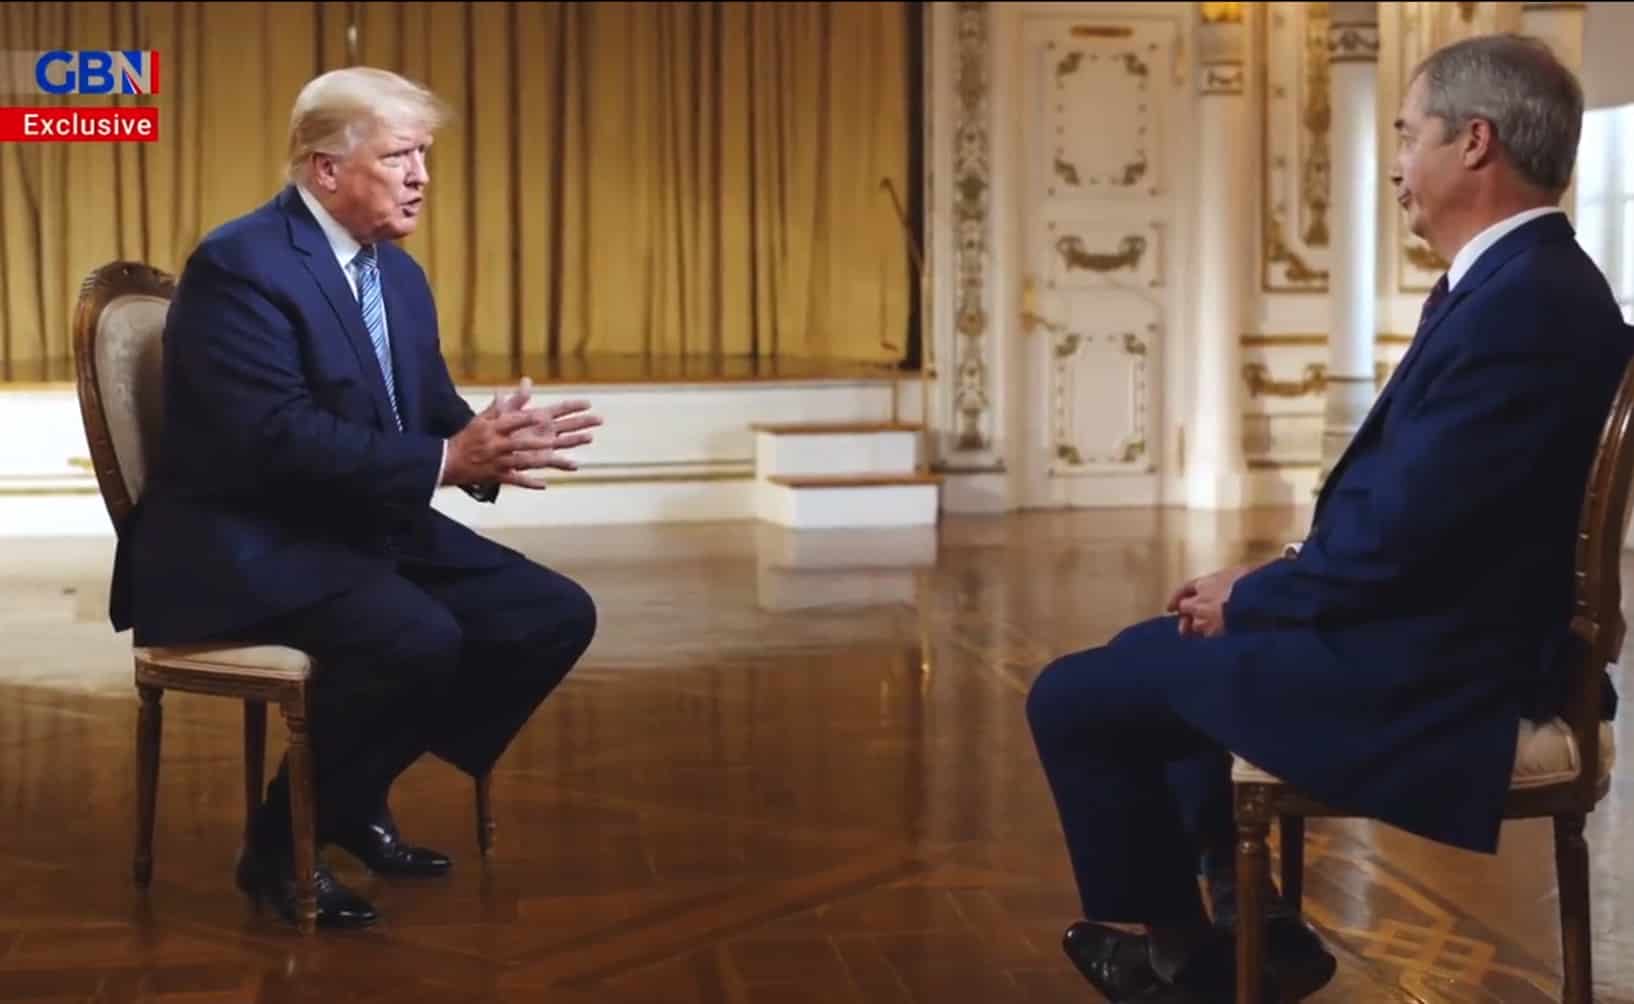 Most bizarre things Trump said during interview with Farage on GB News